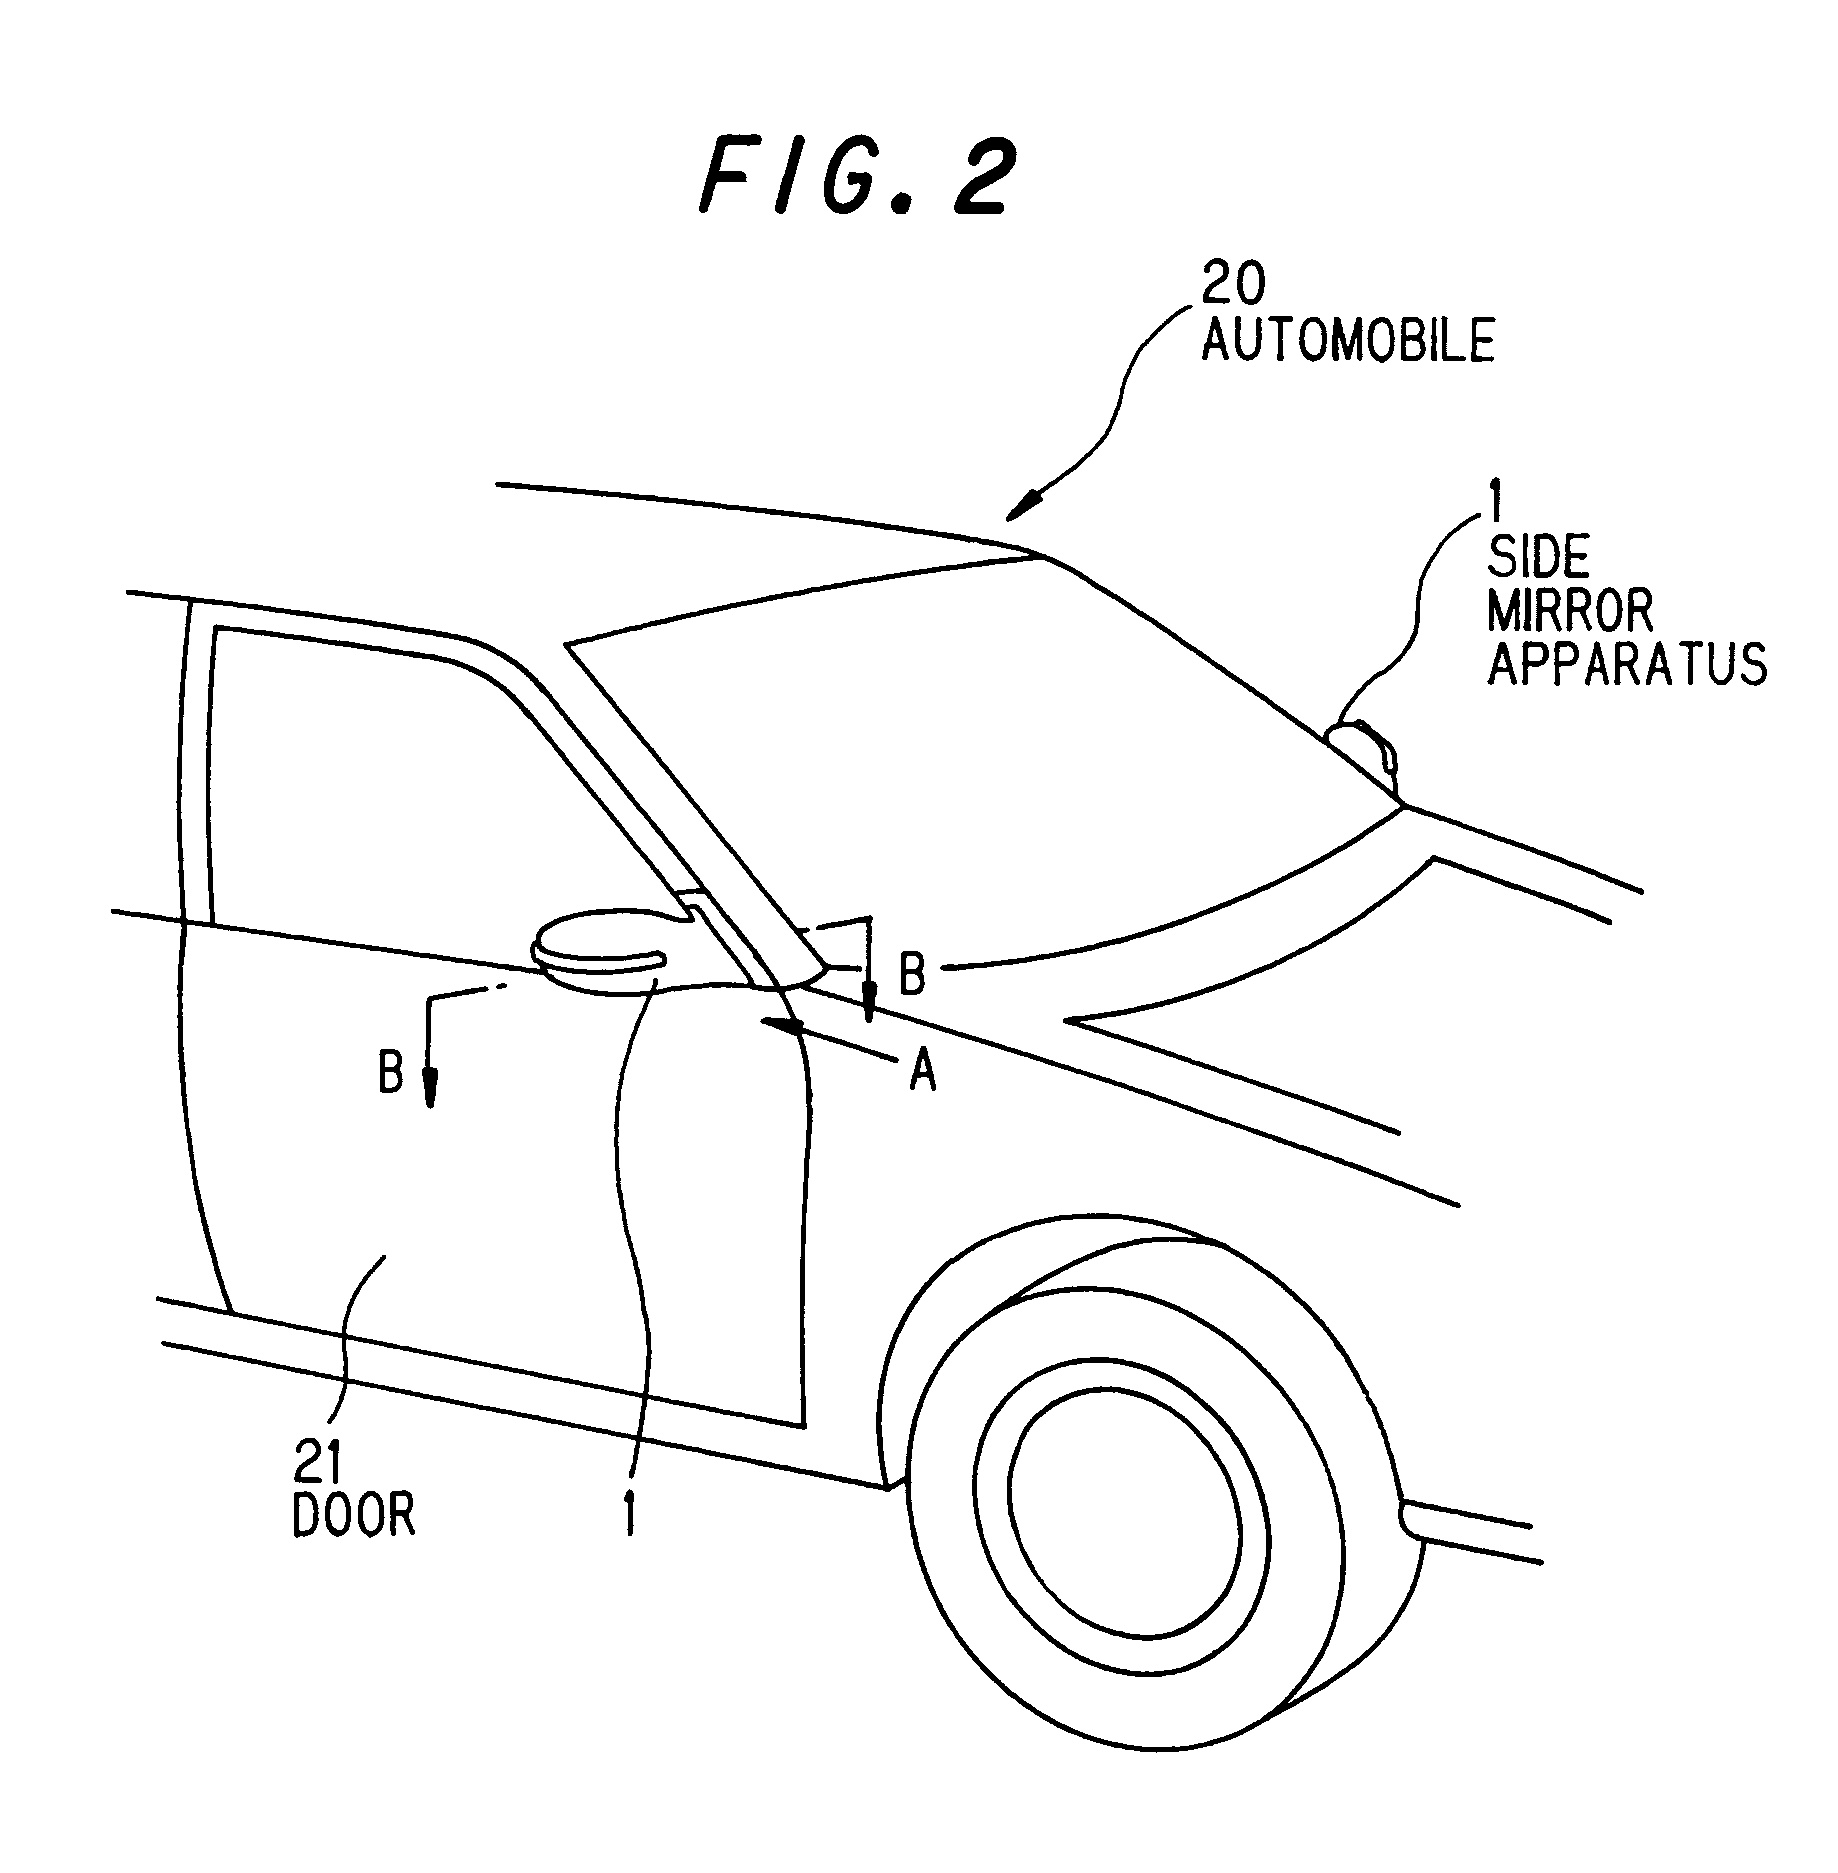 Vehicle rearview mirror including a light-emitting diode apparatus